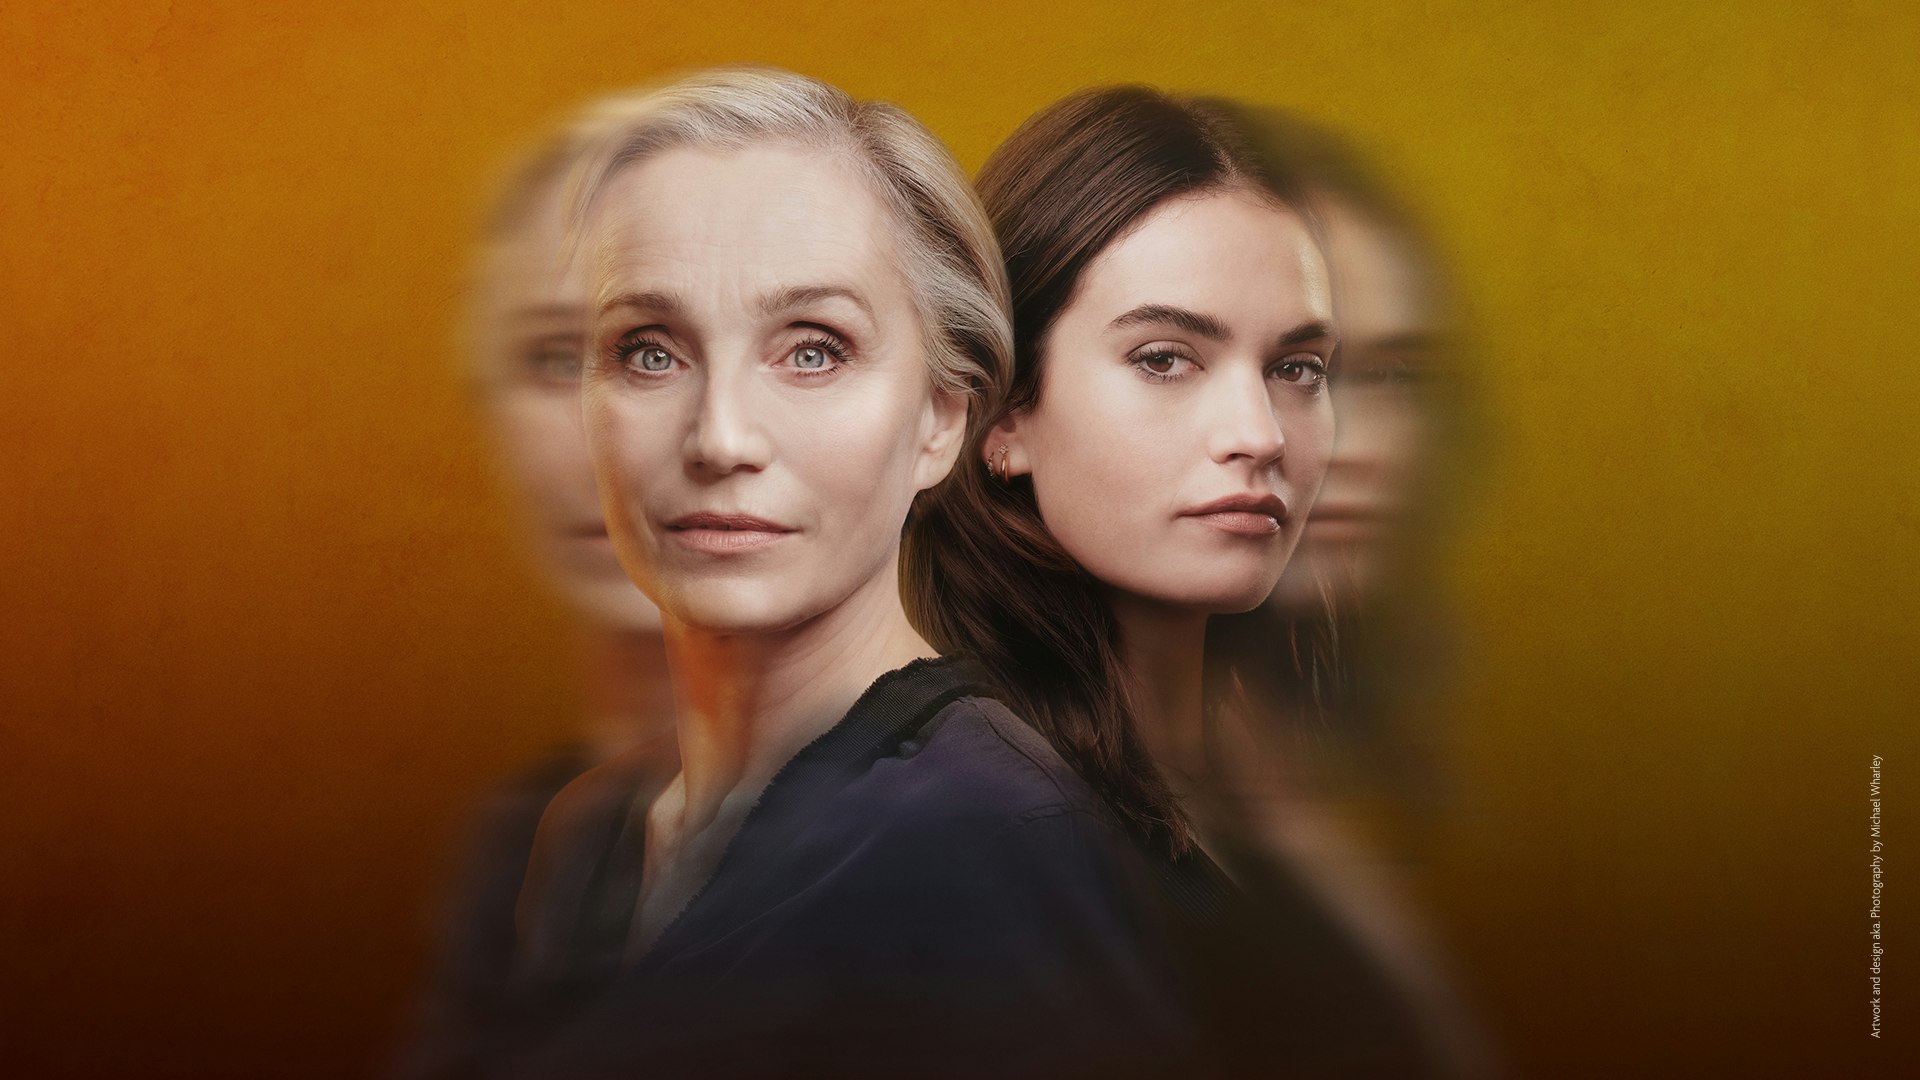 Landscape---Kristin-Scott-Thomas-and-Lily-James-who-star-in-Lyonesse.-Photography-by-Michael-Wharley.-Artwork-and-design-AKA.jpg